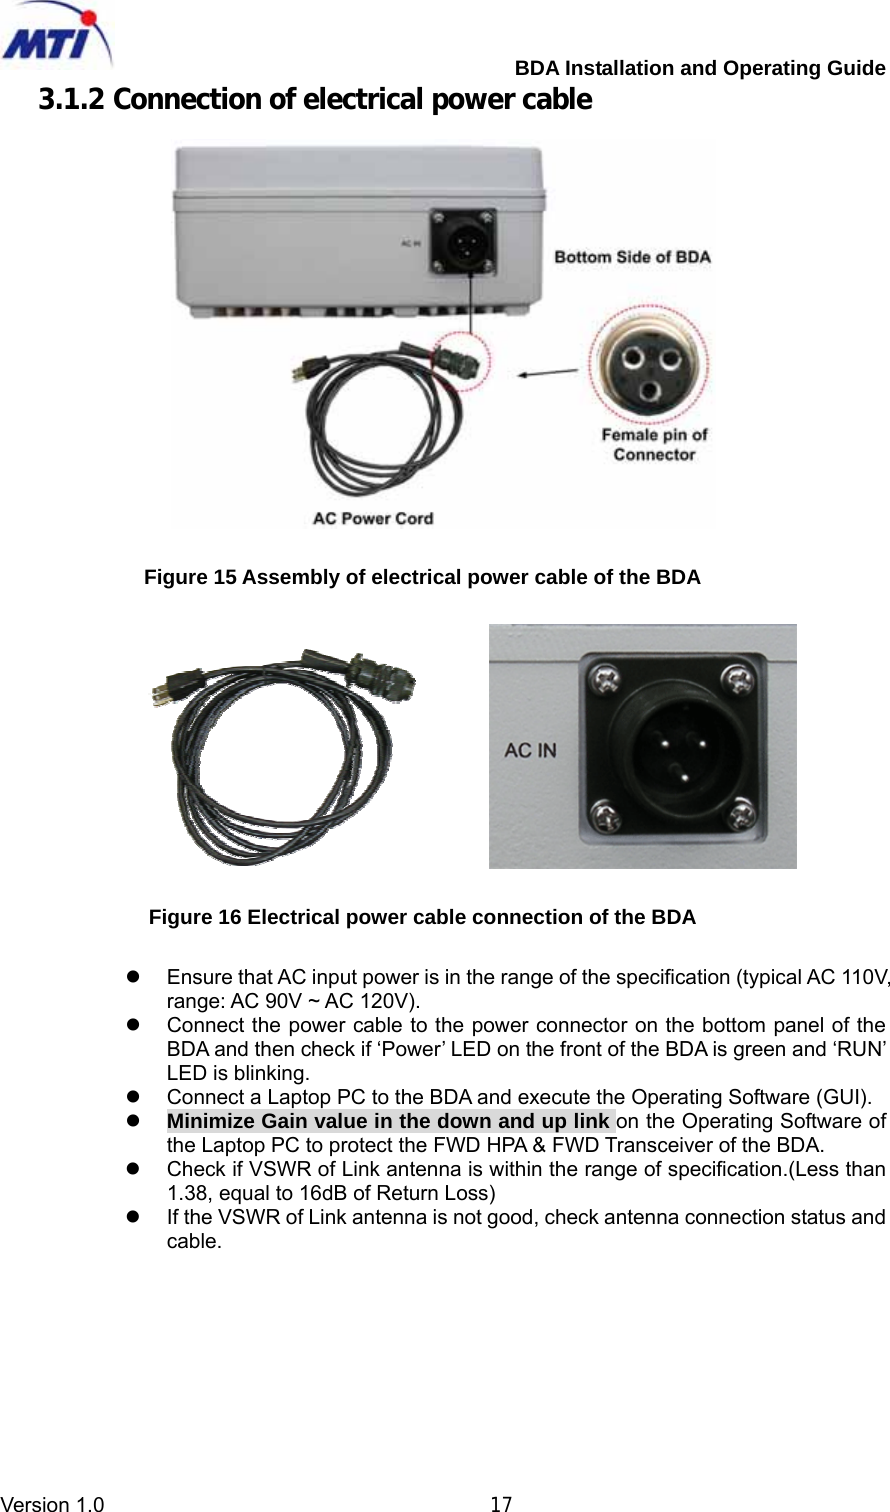         BDA Installation and Operating Guide Version 1.0                                       17 3.1.2 Connection of electrical power cable      Figure 15 Assembly of electrical power cable of the BDA            Figure 16 Electrical power cable connection of the BDA  z  Ensure that AC input power is in the range of the specification (typical AC 110V, range: AC 90V ~ AC 120V). z  Connect the power cable to the power connector on the bottom panel of the BDA and then check if ‘Power’ LED on the front of the BDA is green and ‘RUN’ LED is blinking.   z  Connect a Laptop PC to the BDA and execute the Operating Software (GUI). z Minimize Gain value in the down and up link on the Operating Software of the Laptop PC to protect the FWD HPA &amp; FWD Transceiver of the BDA. z  Check if VSWR of Link antenna is within the range of specification.(Less than 1.38, equal to 16dB of Return Loss) z  If the VSWR of Link antenna is not good, check antenna connection status and cable.  